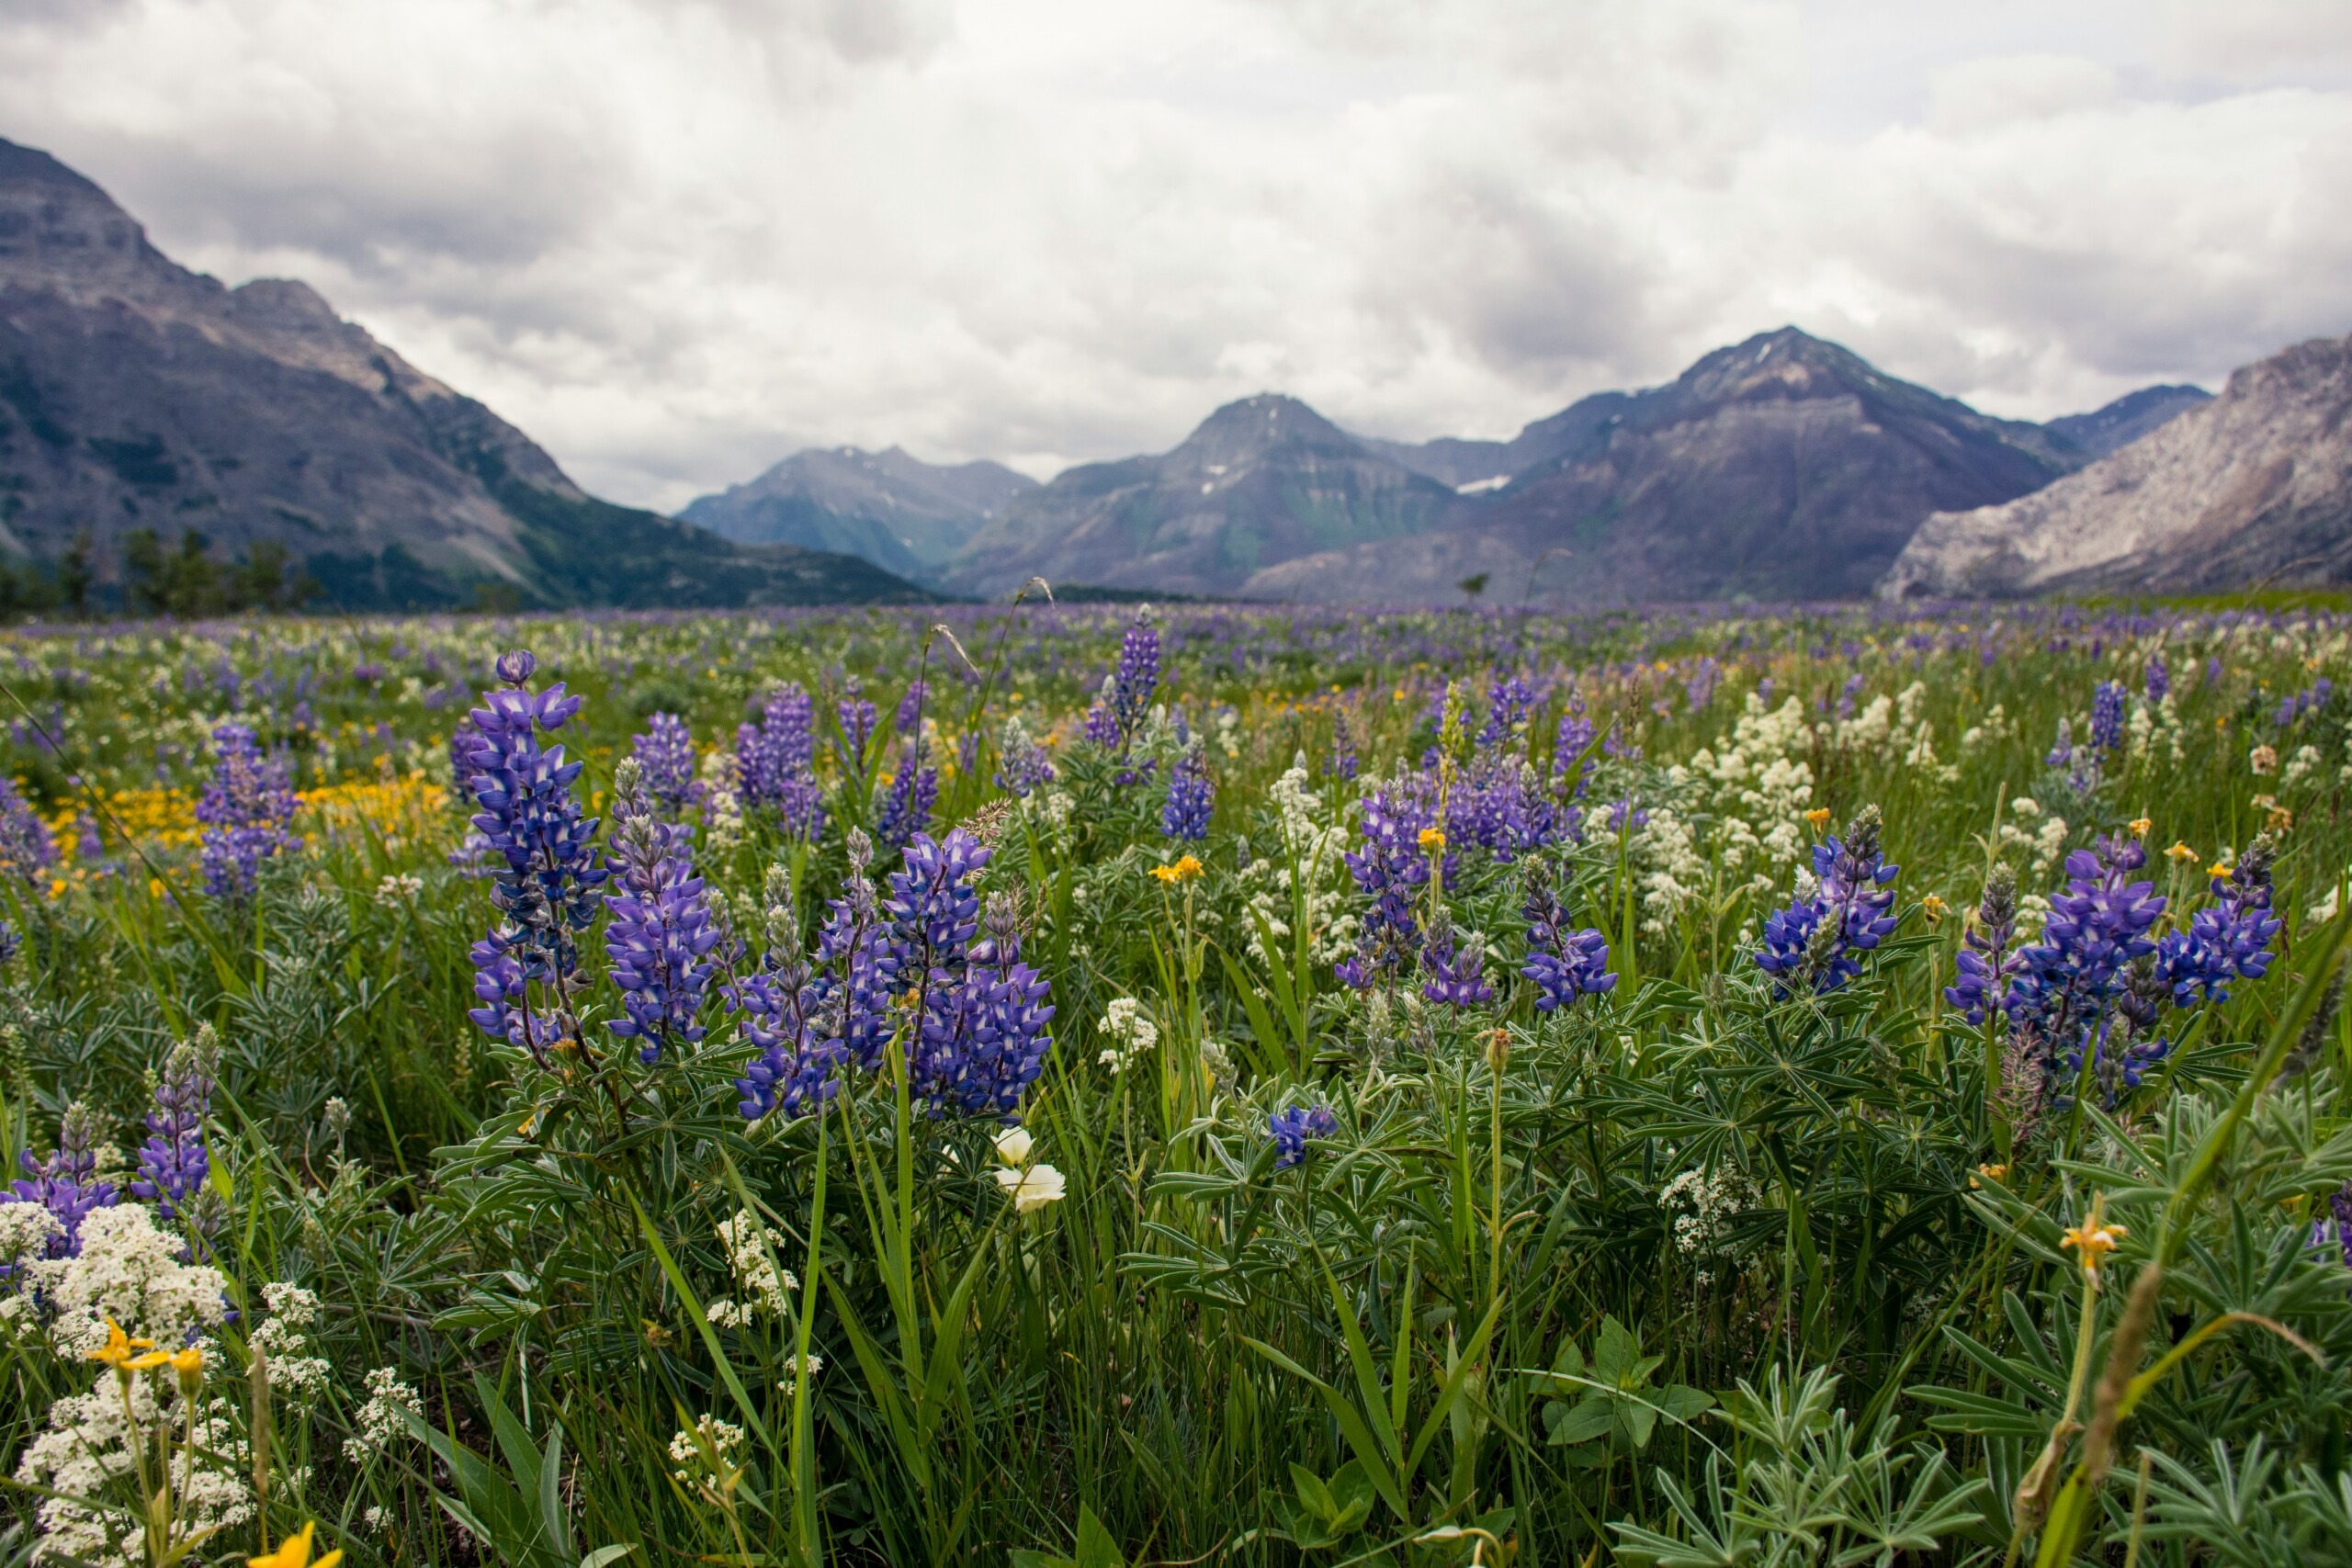 A picture of a flower field with mountains surrounding it and a cloudy sky above.